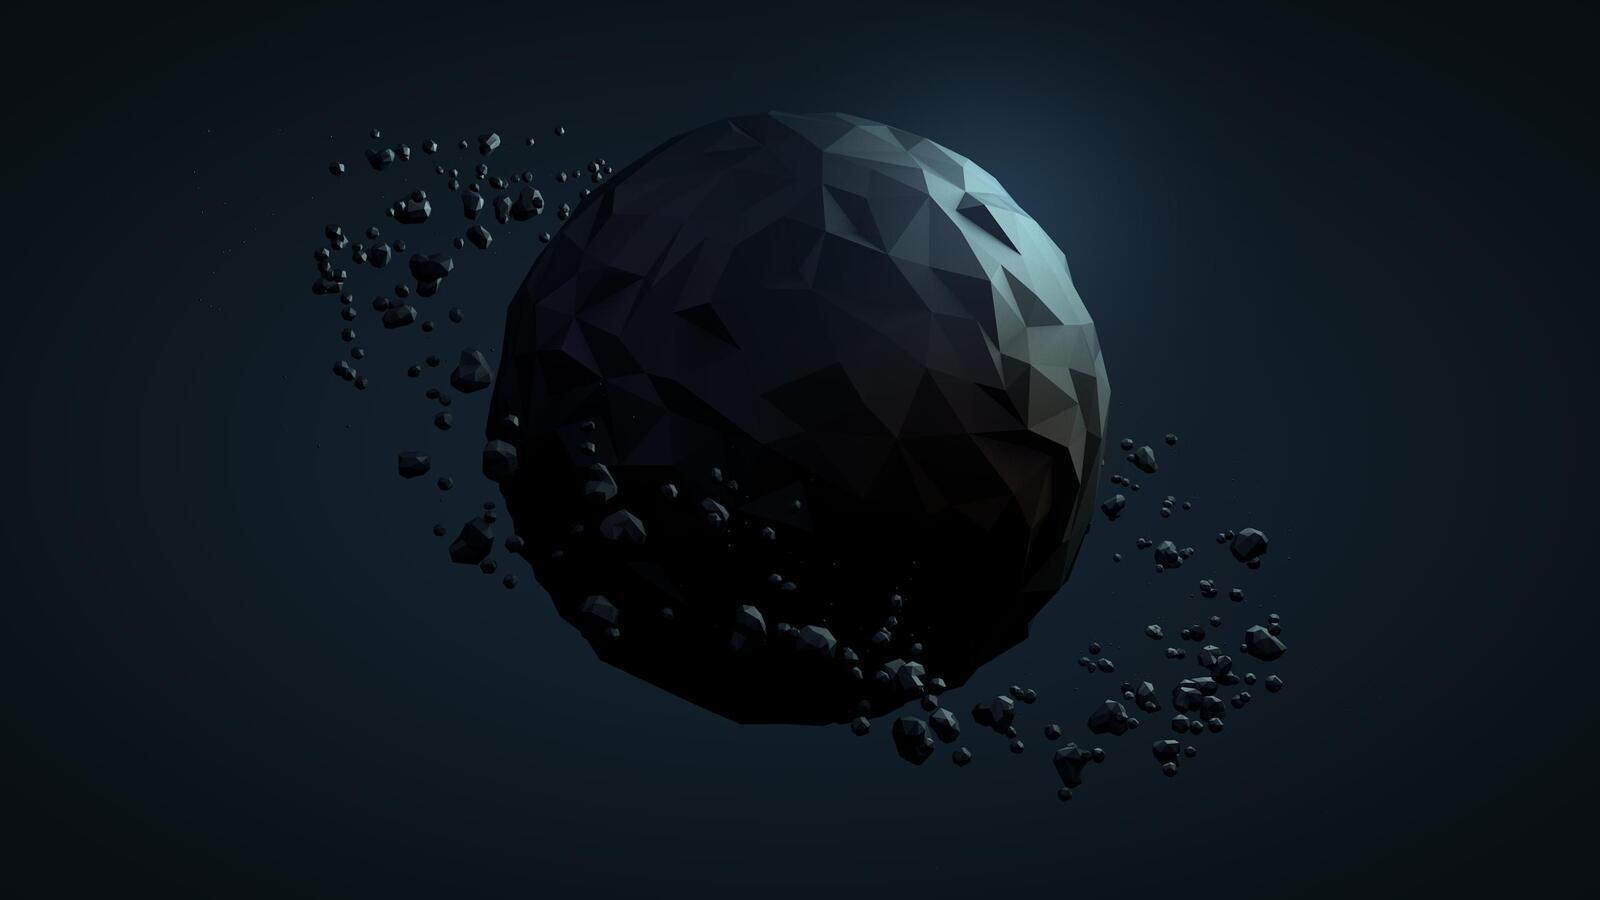 Wallpapers wallpaper low poly planet science on the desktop